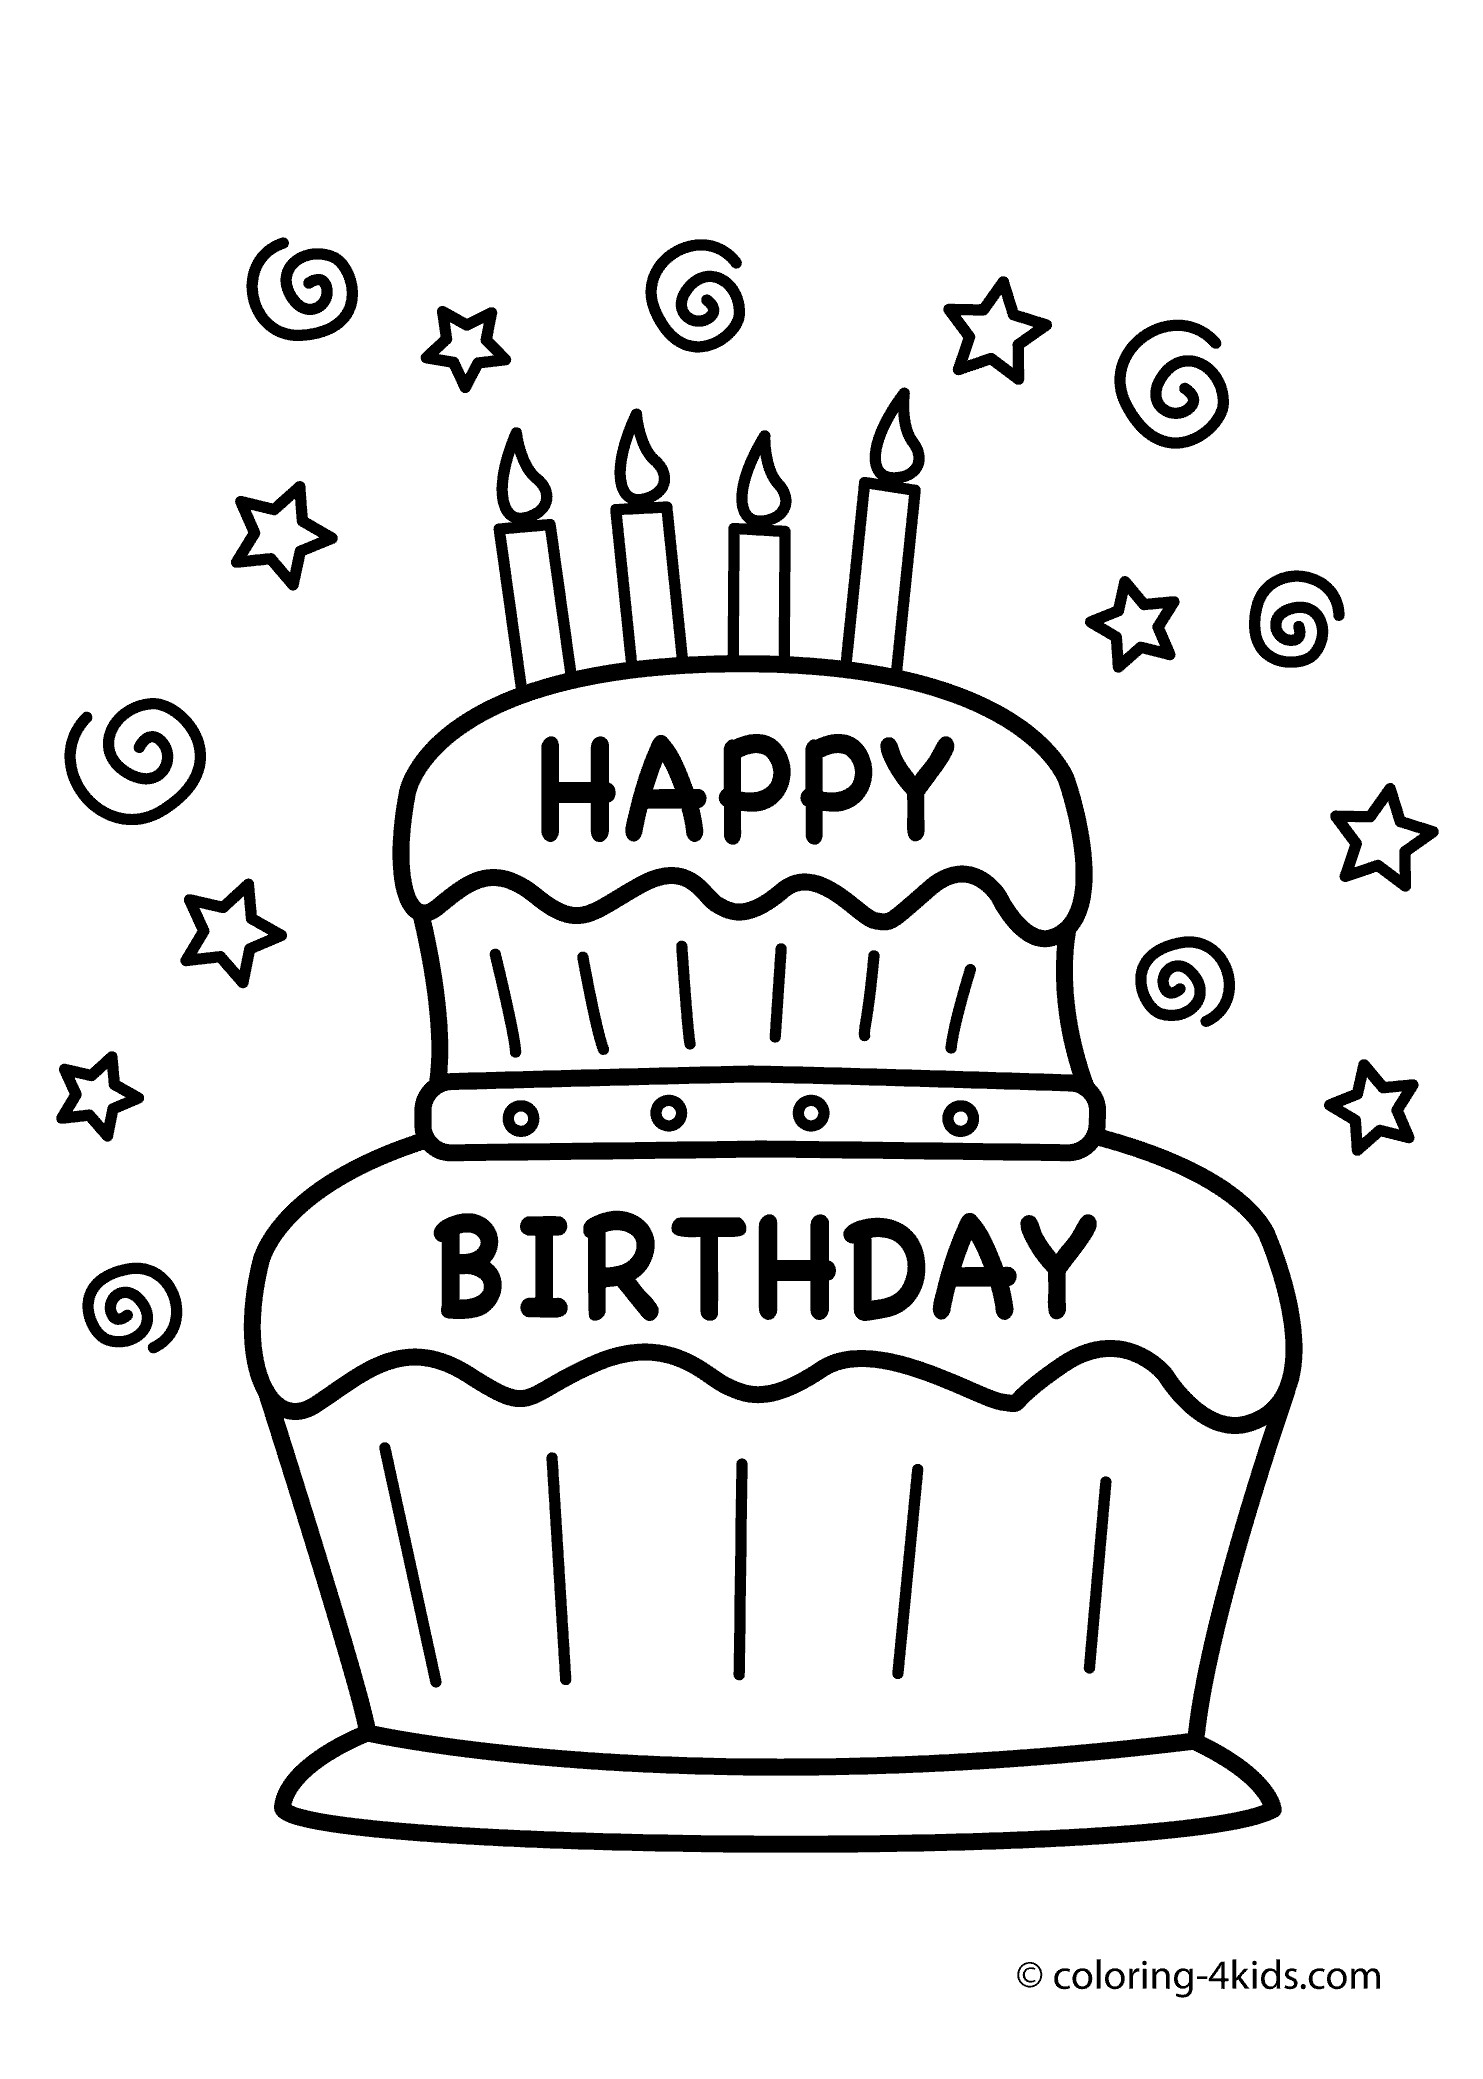 Birthday Cake Template
 Cake Drawing Template at GetDrawings